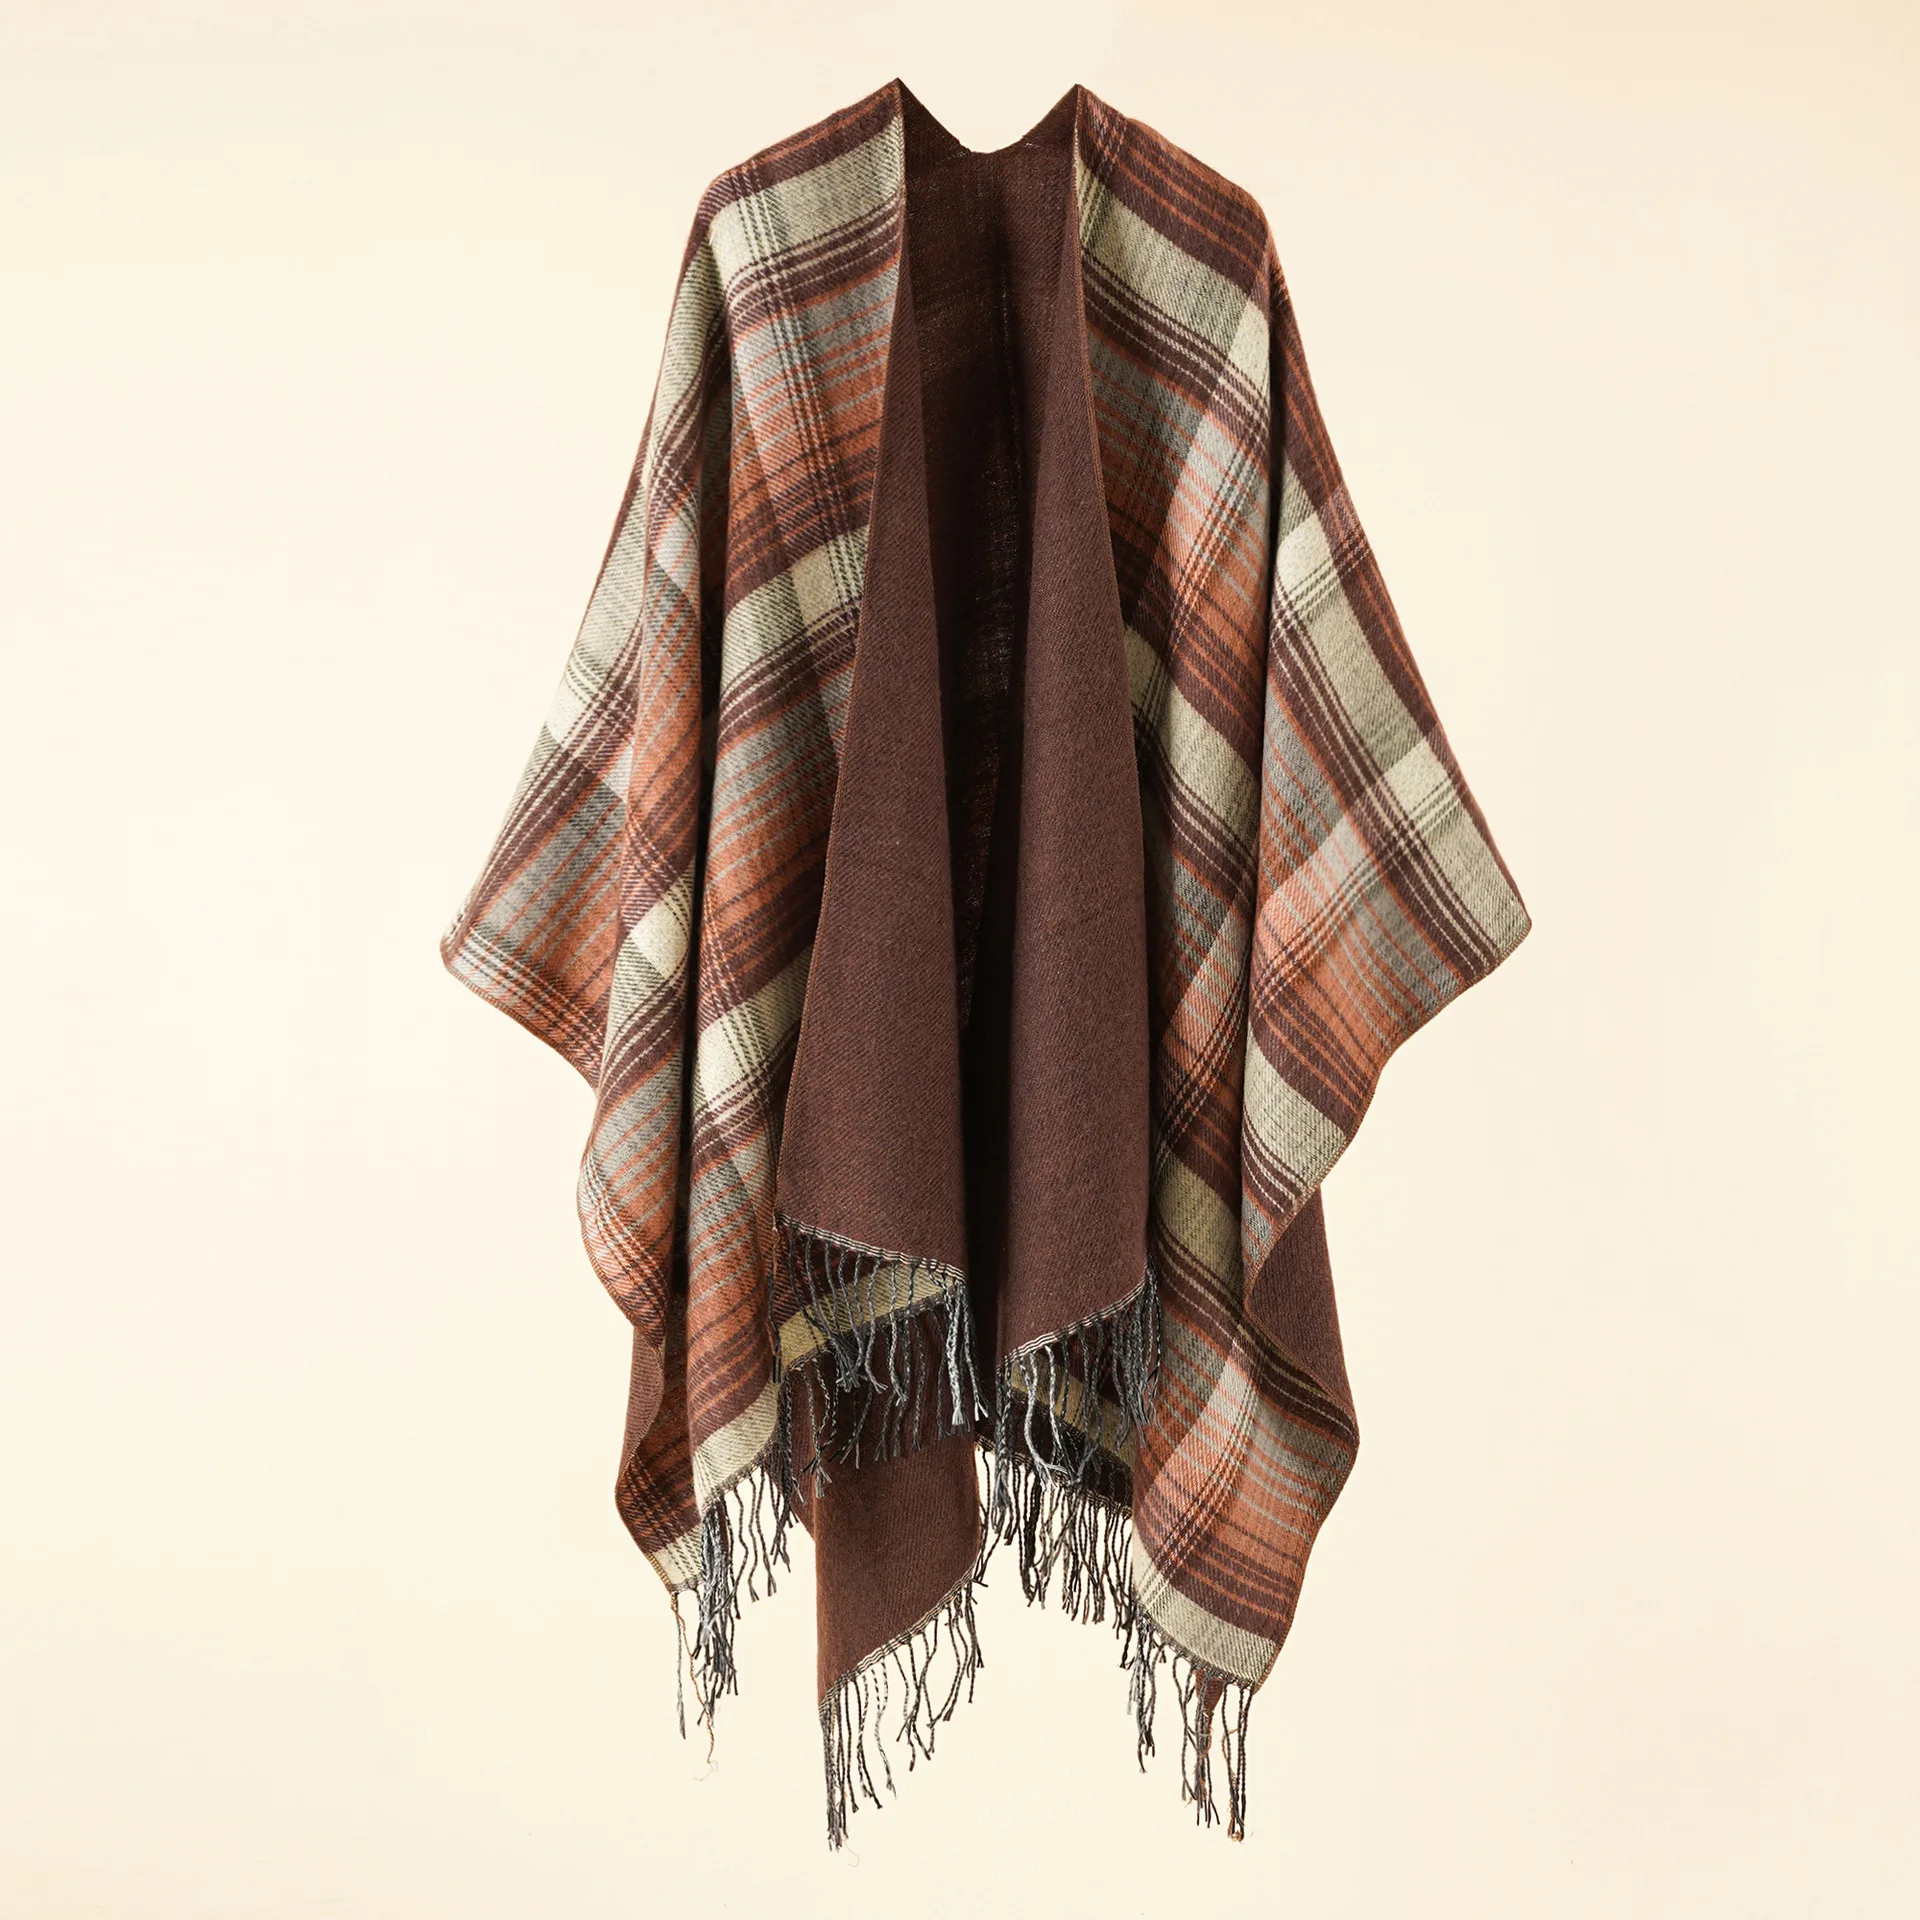 2022 Autumn Winter New Color Grid Pattern Imitation Cashmere Warm Casual Women Tassels Shawl  Poncho Capes Lady Coat Coffee 2022 spring hanging dyed shawl tassels on four sides gradient color wavy pattern loose large knitted hollow pullover coffee